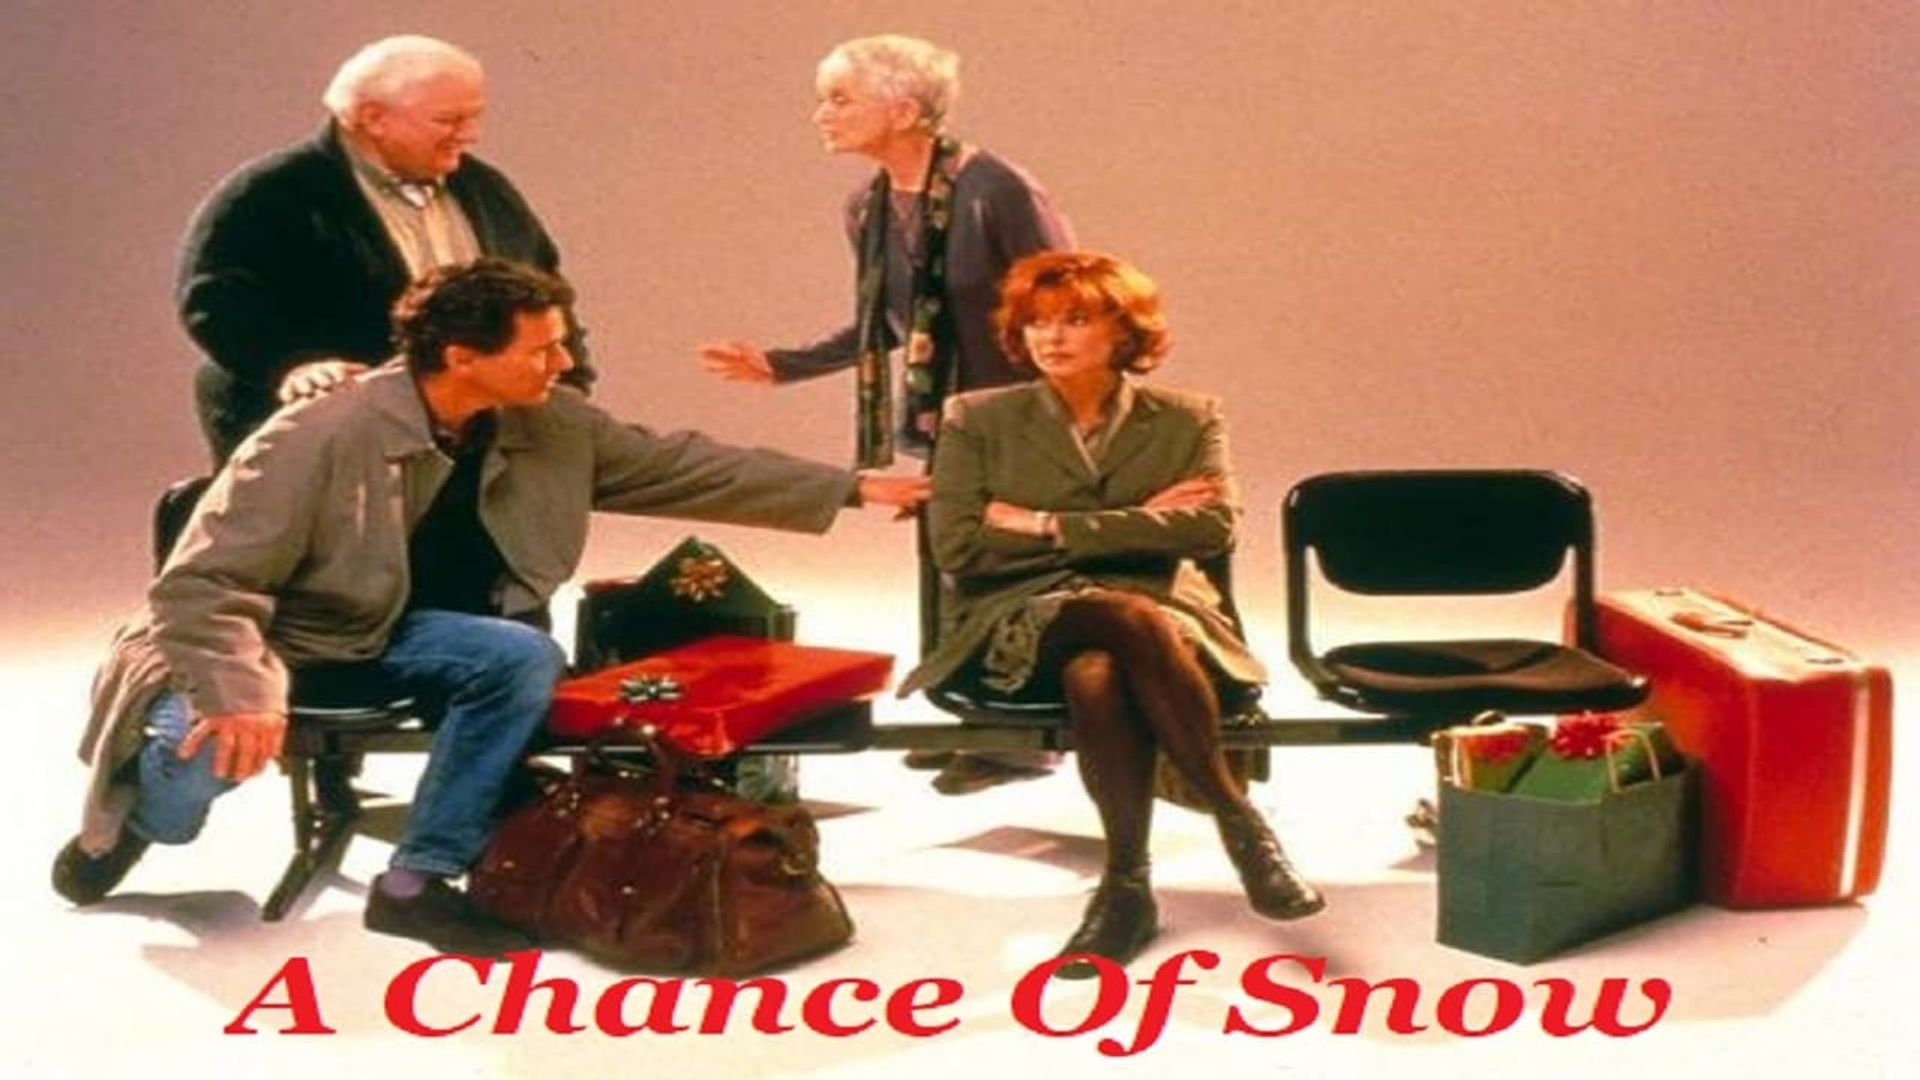 A Chance of Snow background